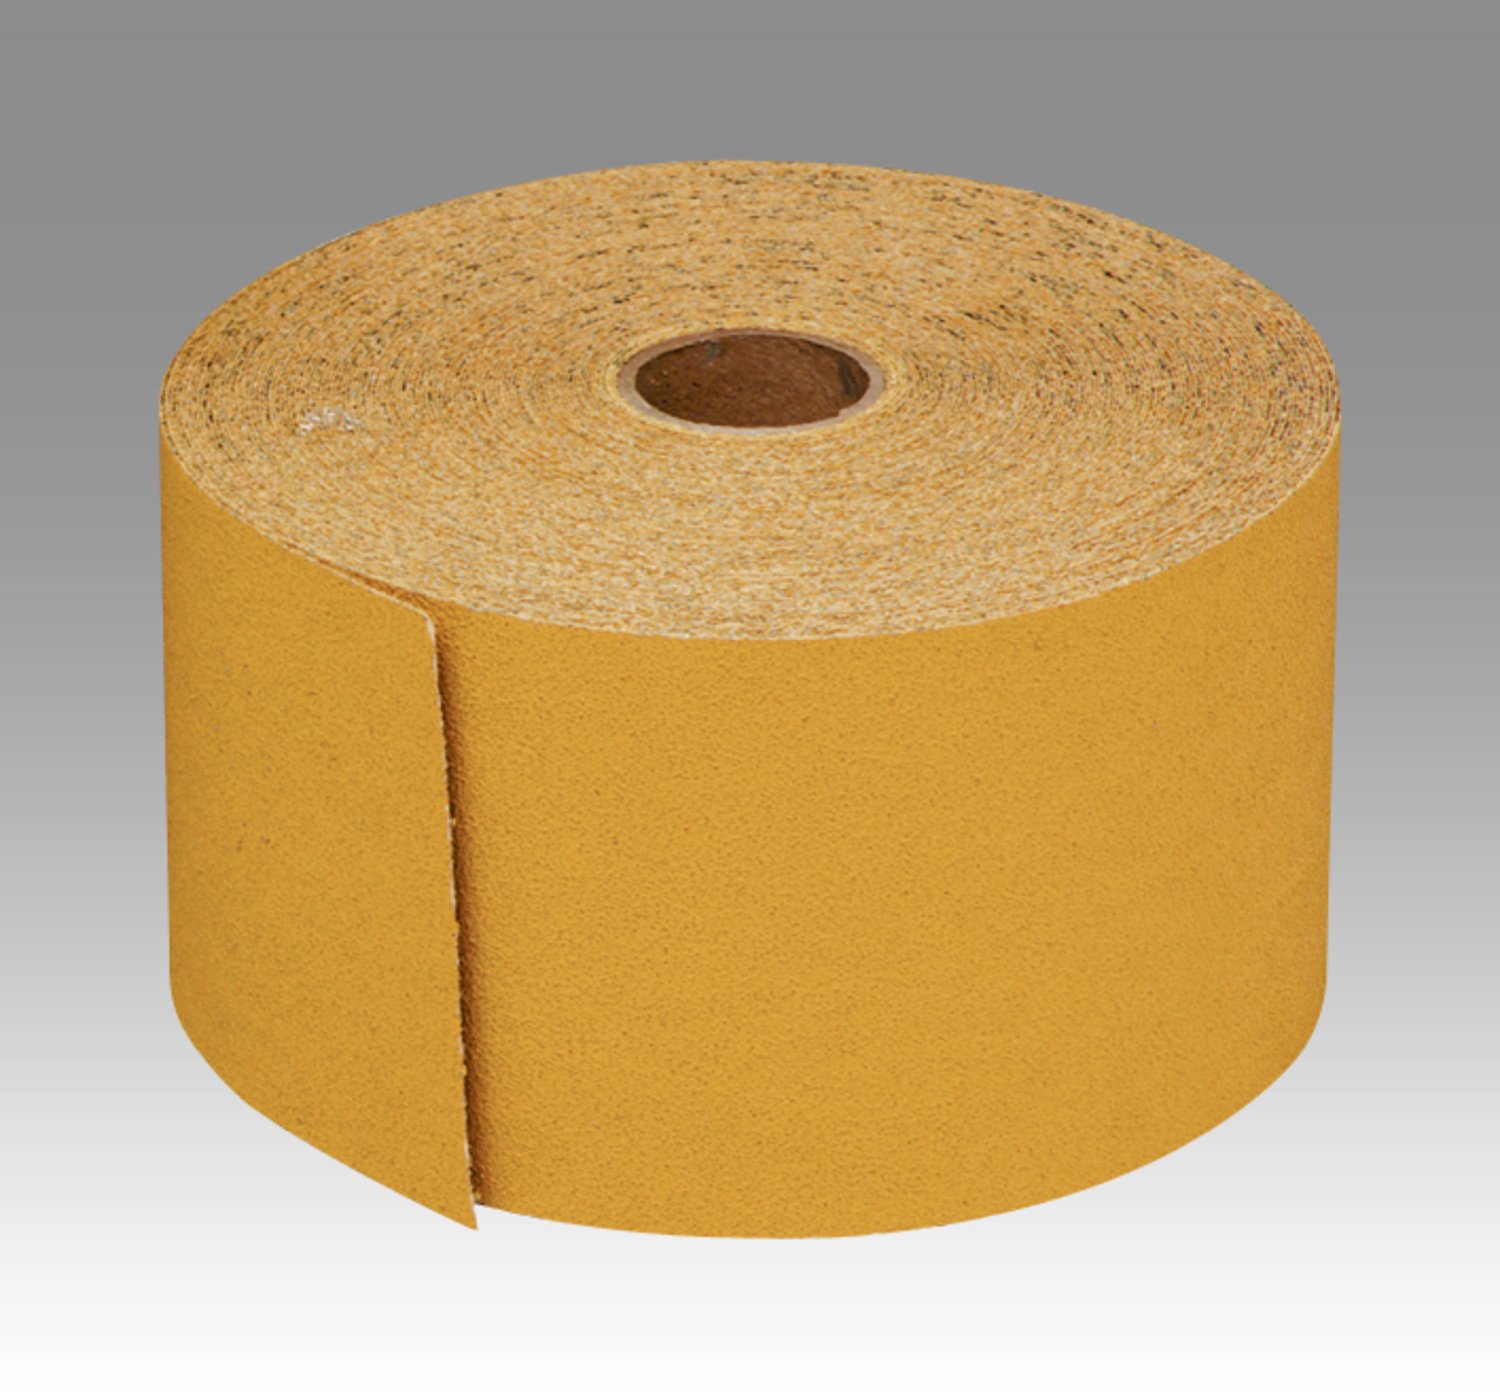 7000119166 - 3M Stikit Gold Paper Sheet Roll 216U, 2-3/4 in x 30 yd P100 A-weight,
10 ea/Case